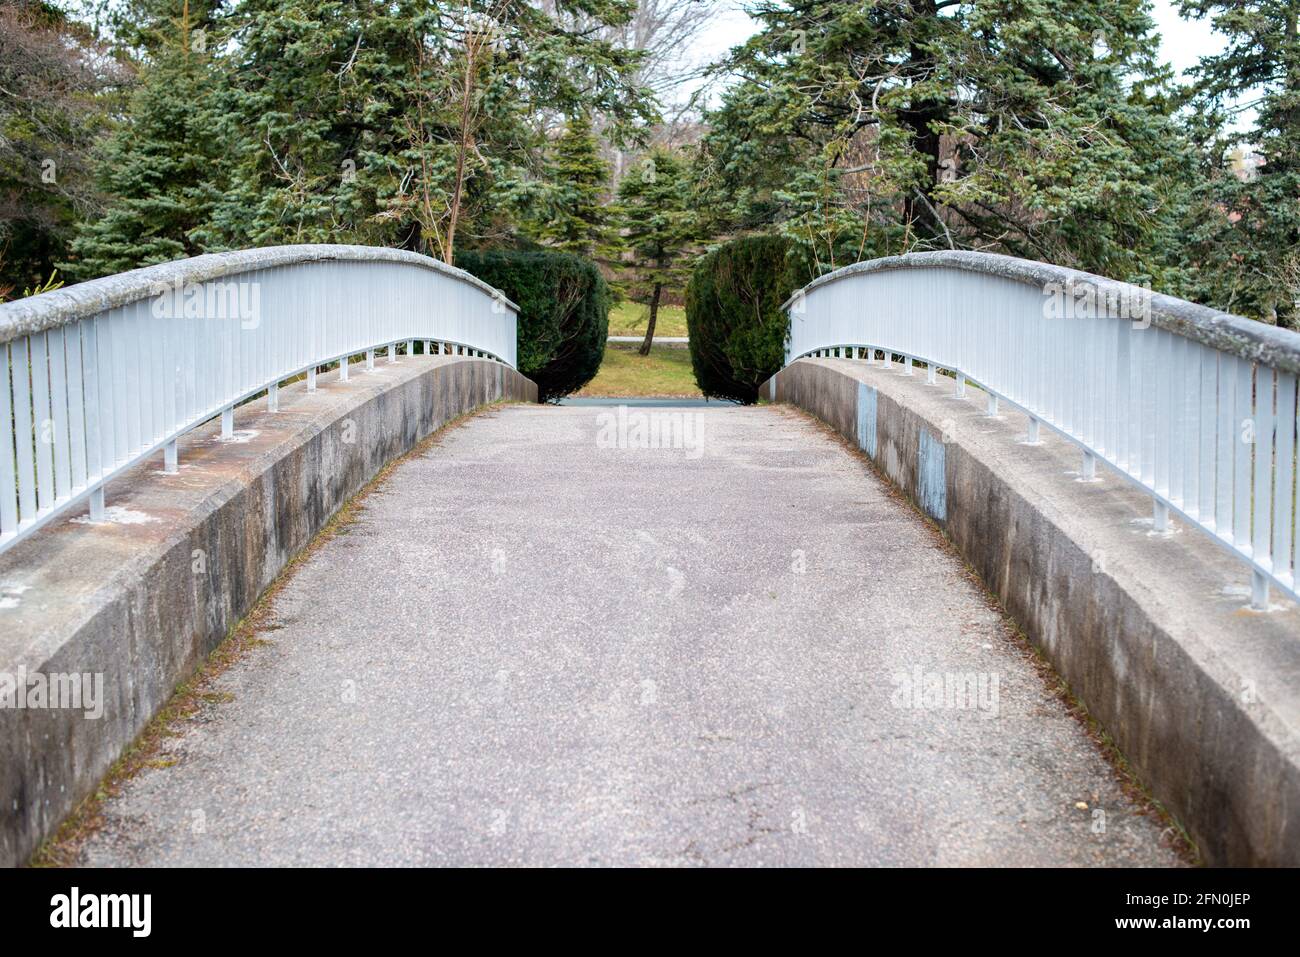 A vintage concrete pathway cantilever bridge spanning over a path in a park. Stock Photo